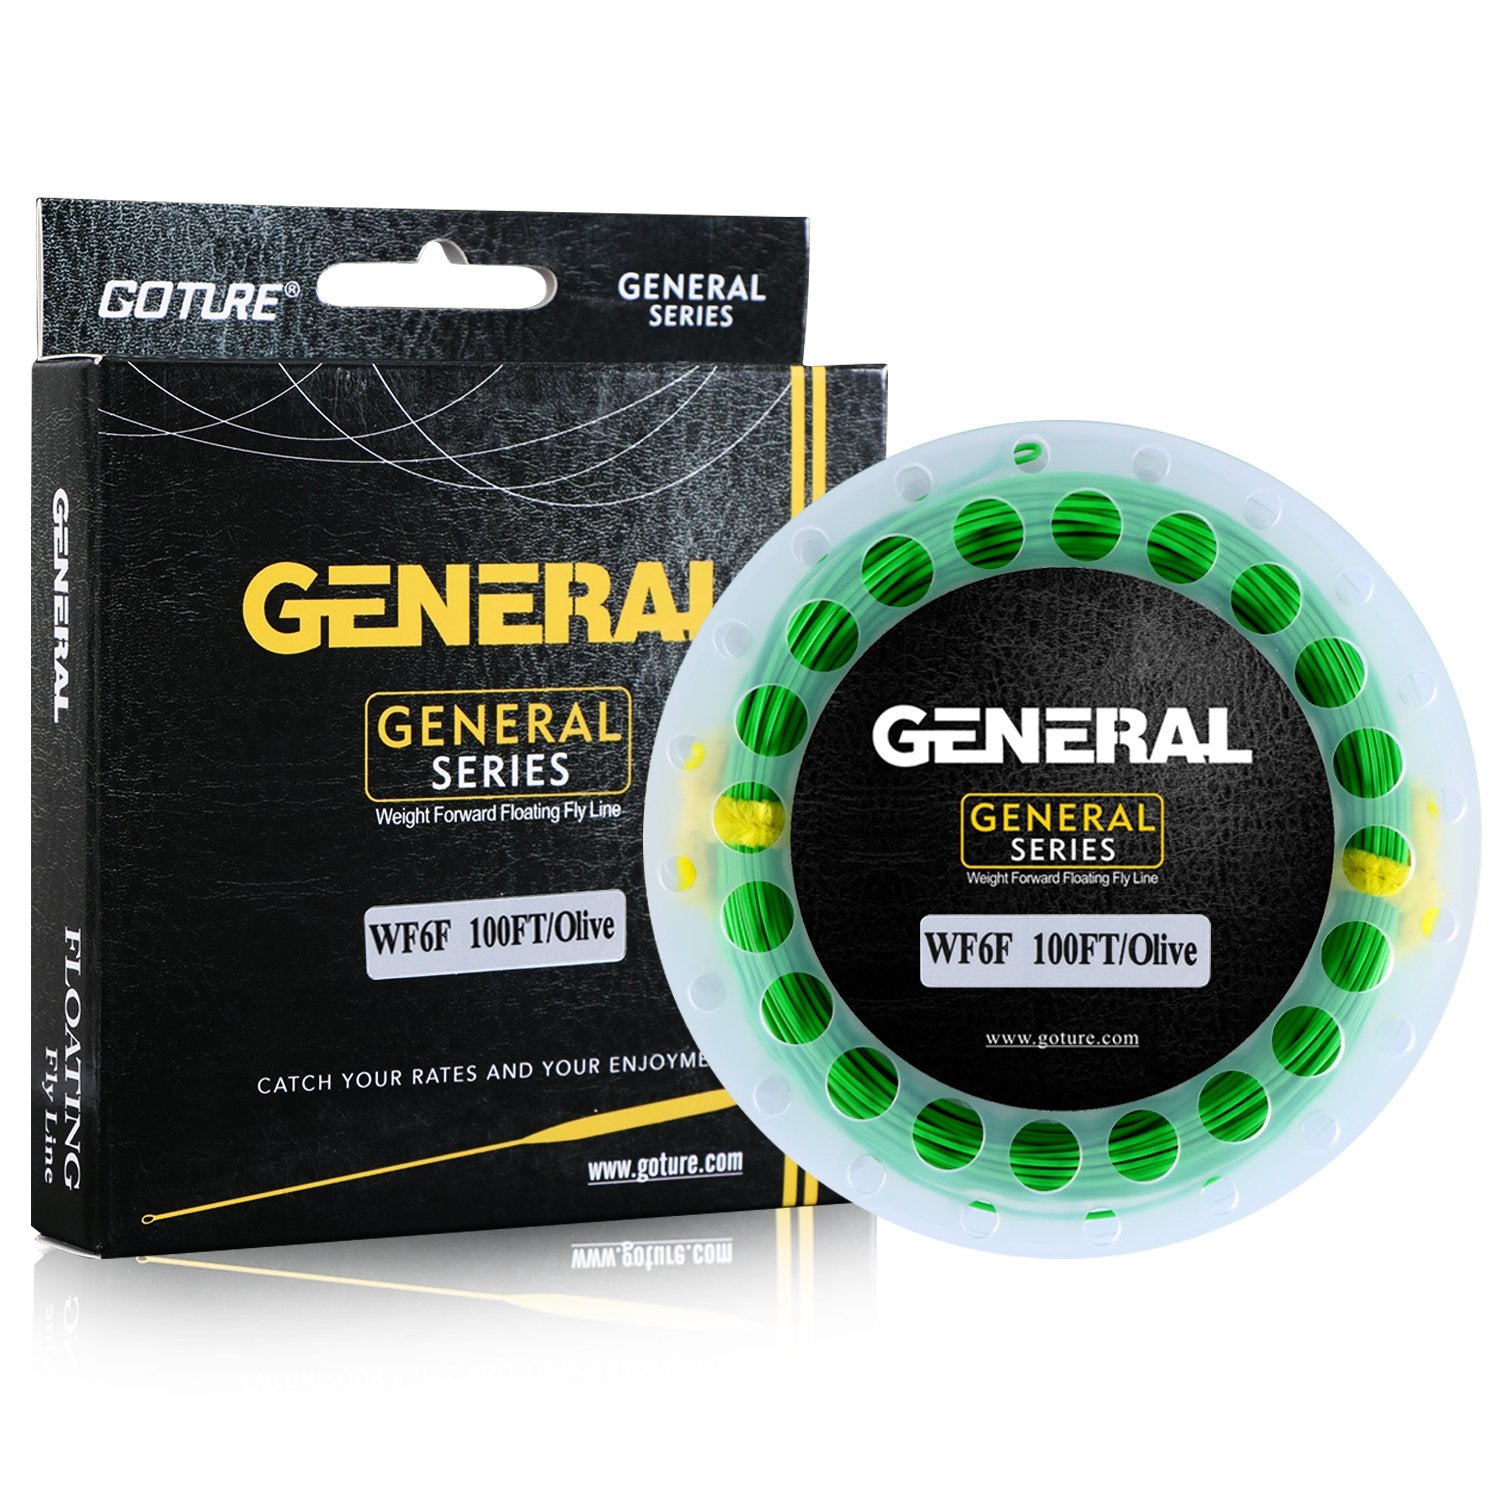 Goture WF 100FT 3F to 8F Weight Forward Floating Fly Fishing Line